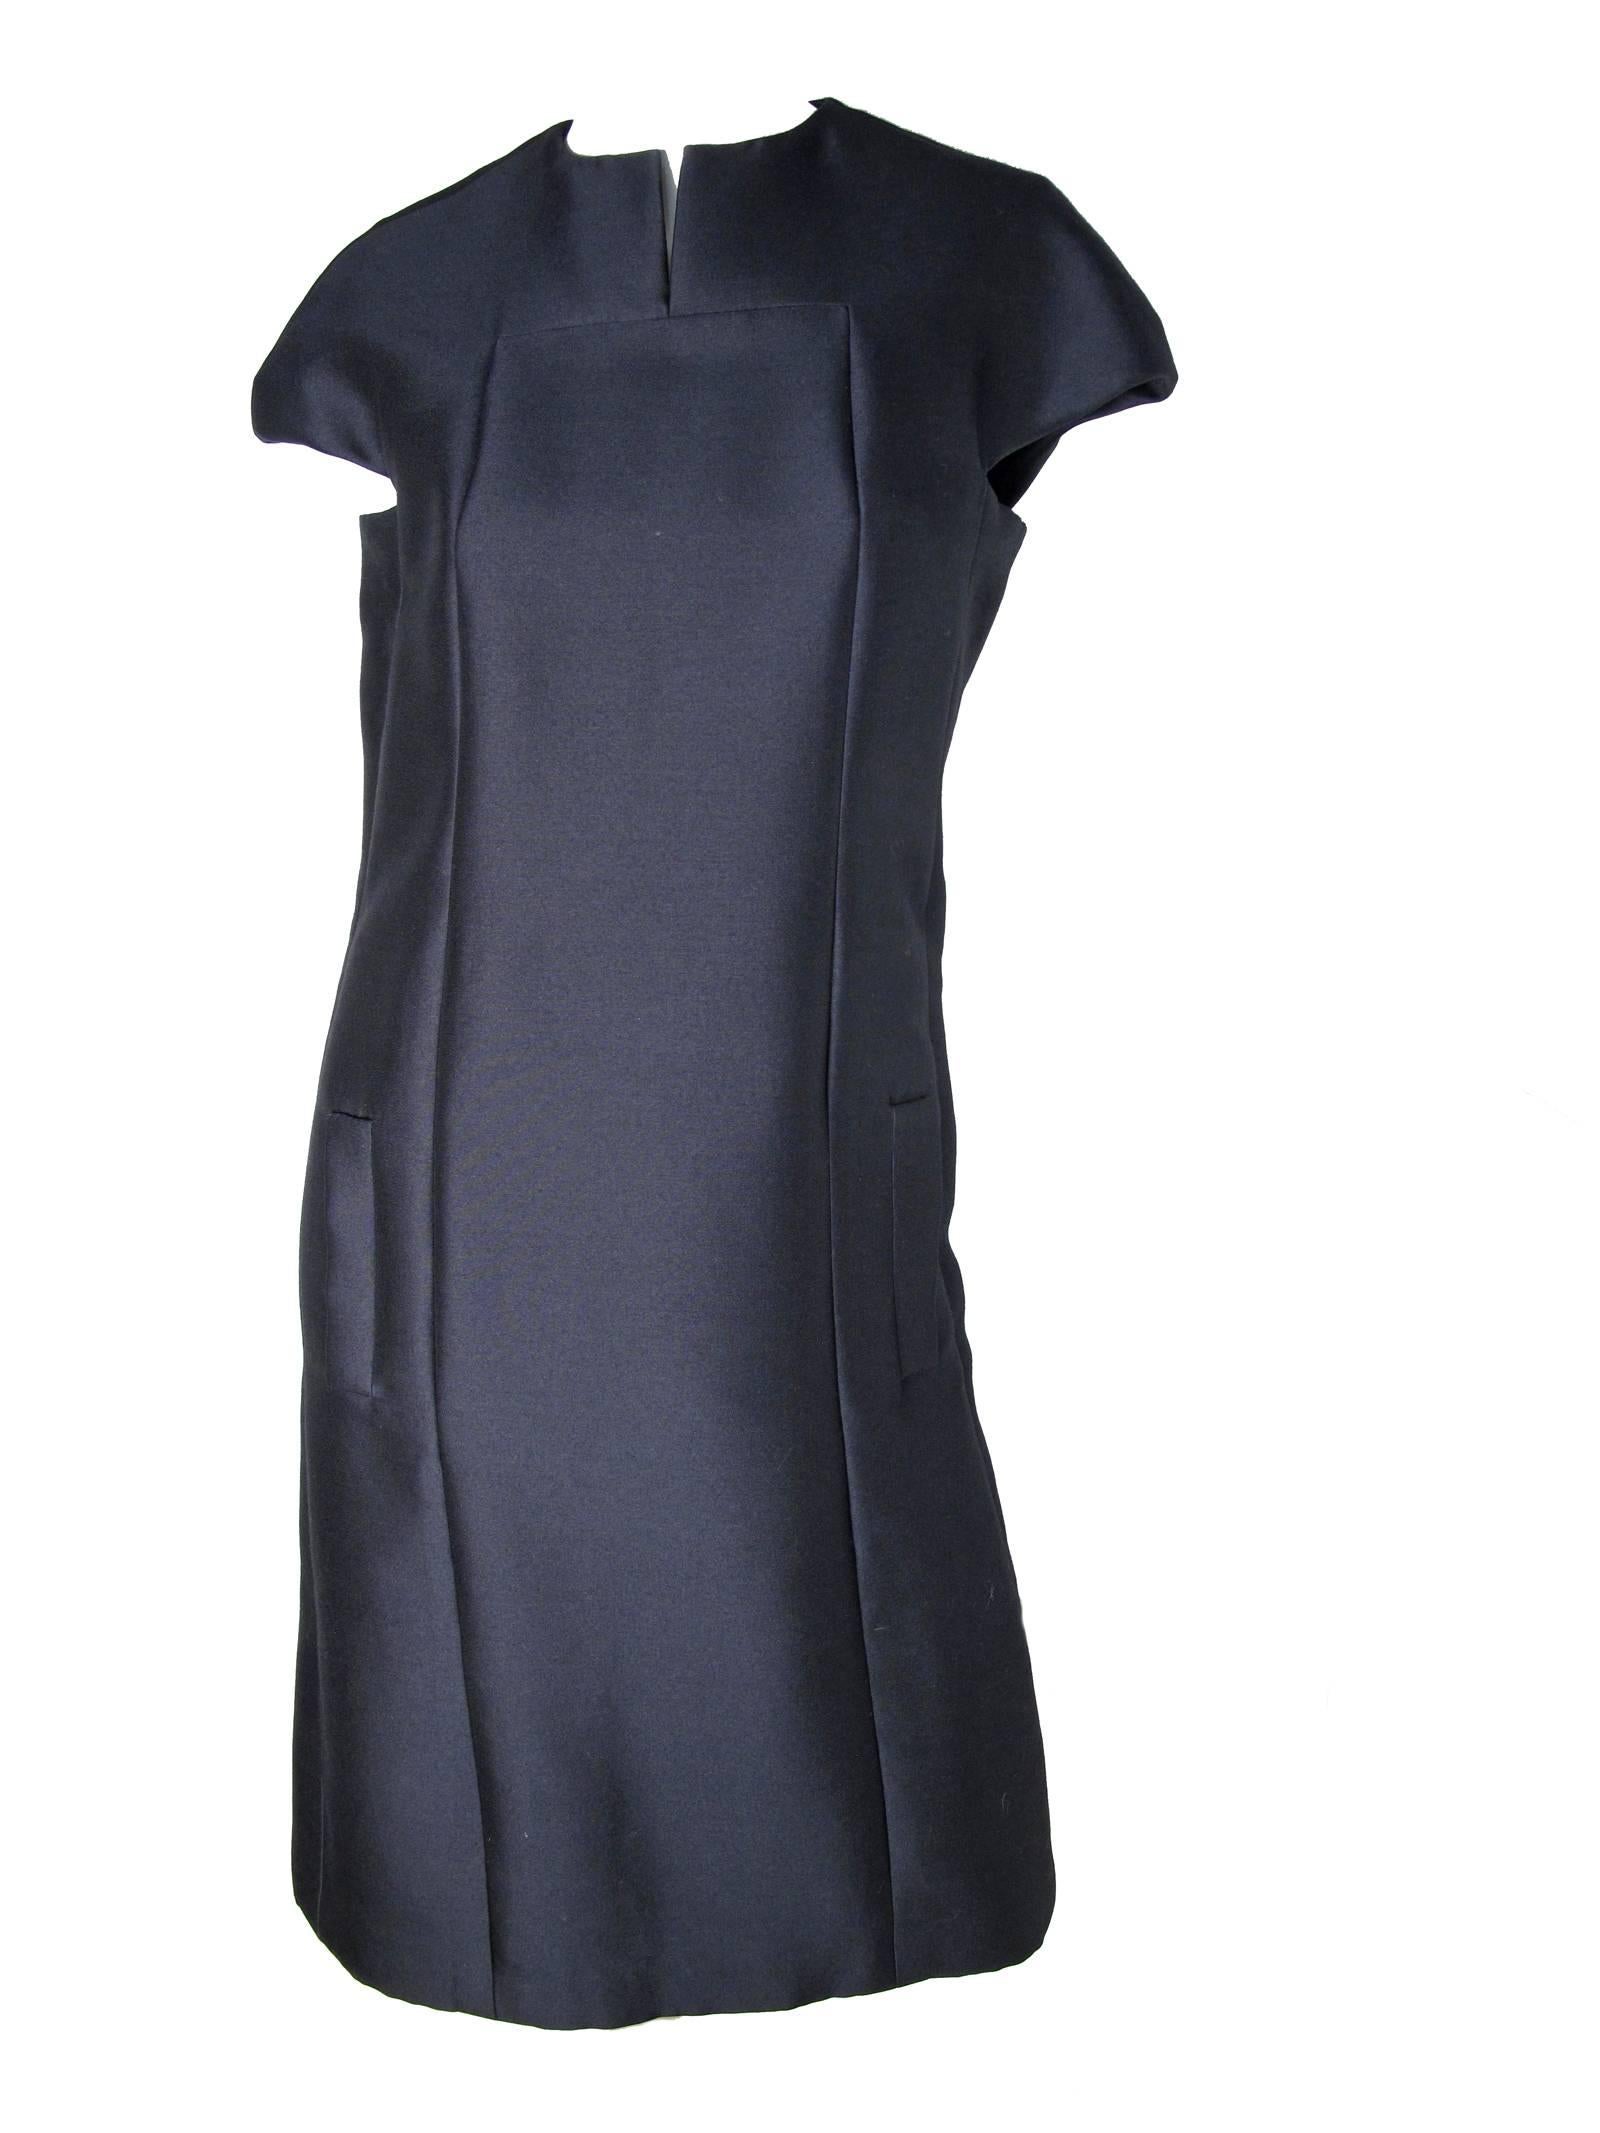 1960s Geoffrey Beene navy silk cocktail dress with side pockets. 
Condition: Excellent. Size 8
approximate measurements: 36